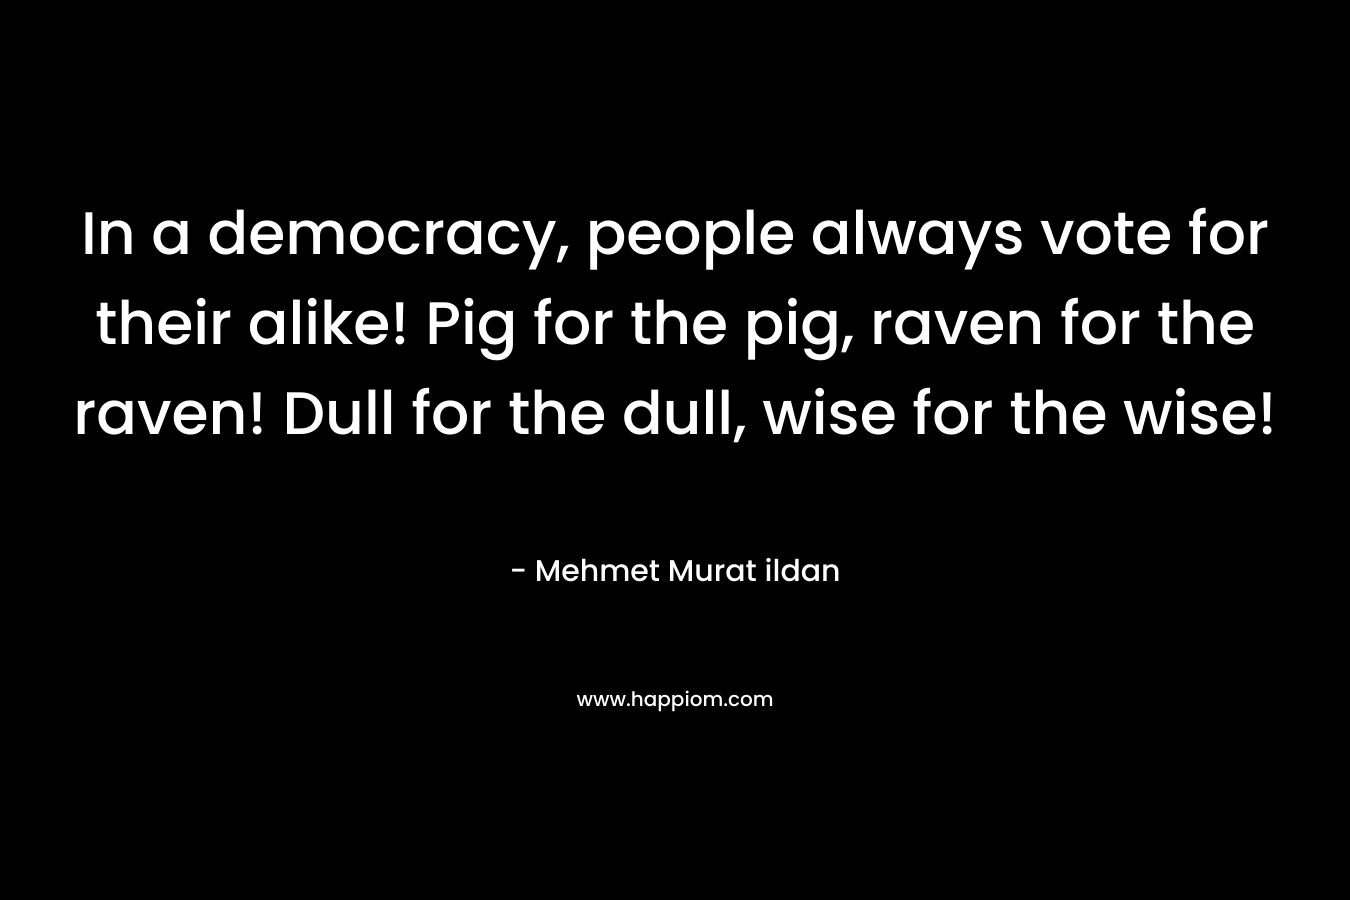 In a democracy, people always vote for their alike! Pig for the pig, raven for the raven! Dull for the dull, wise for the wise! – Mehmet Murat ildan